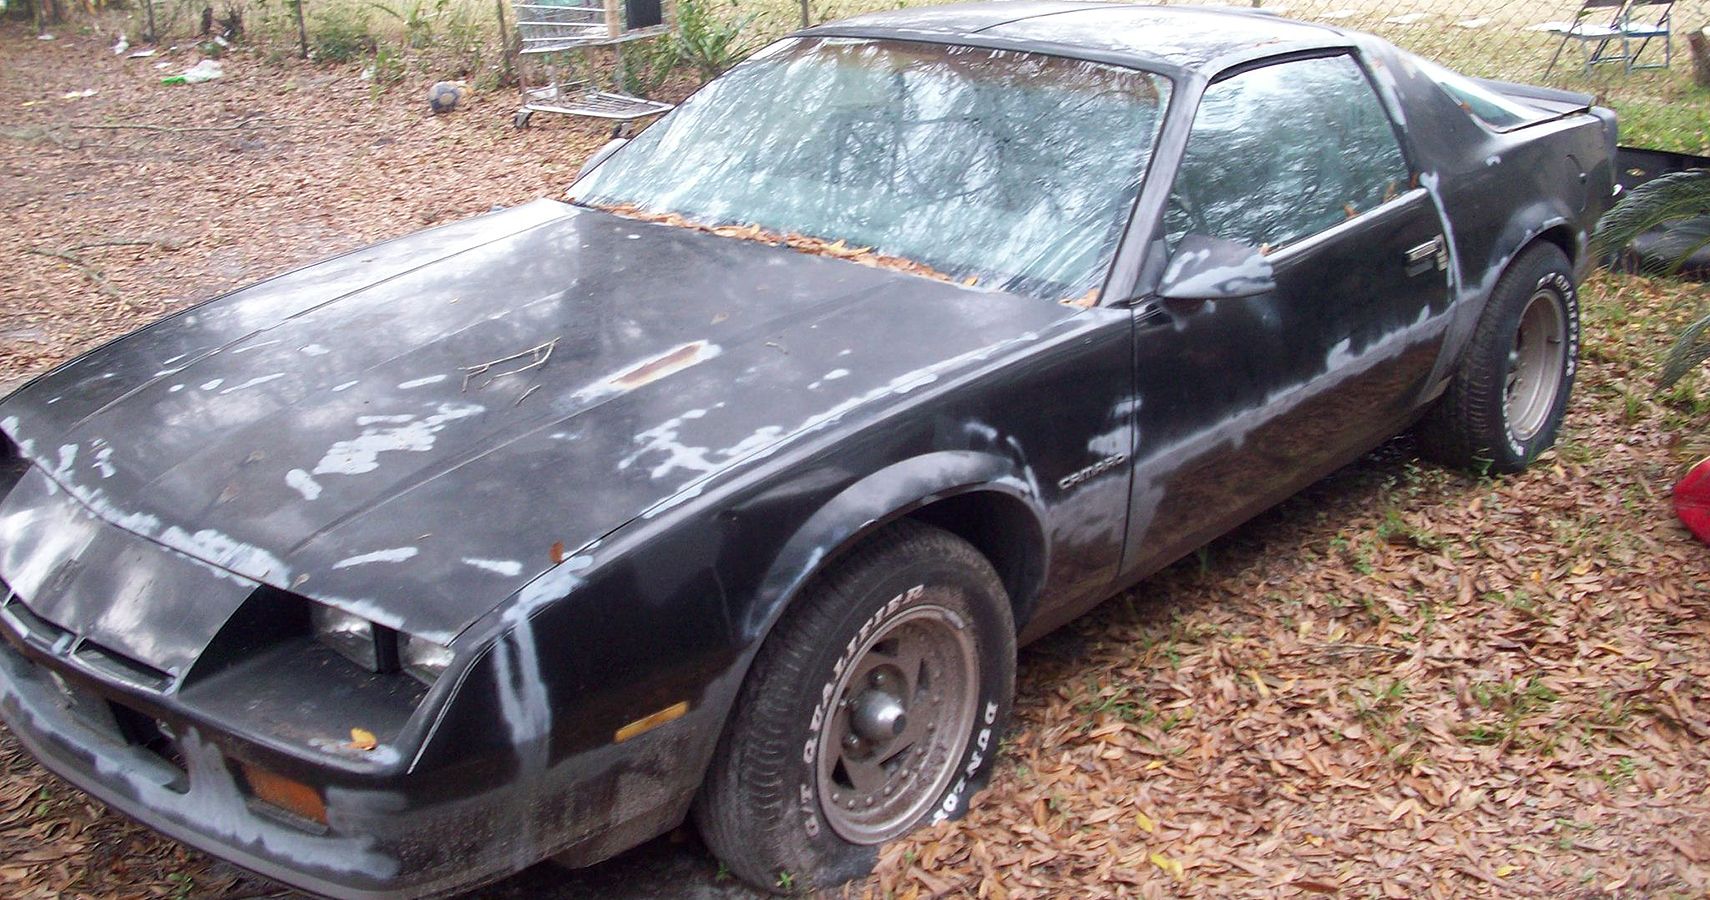 15 Images Of Abandoned Camaros That Made Us Teary